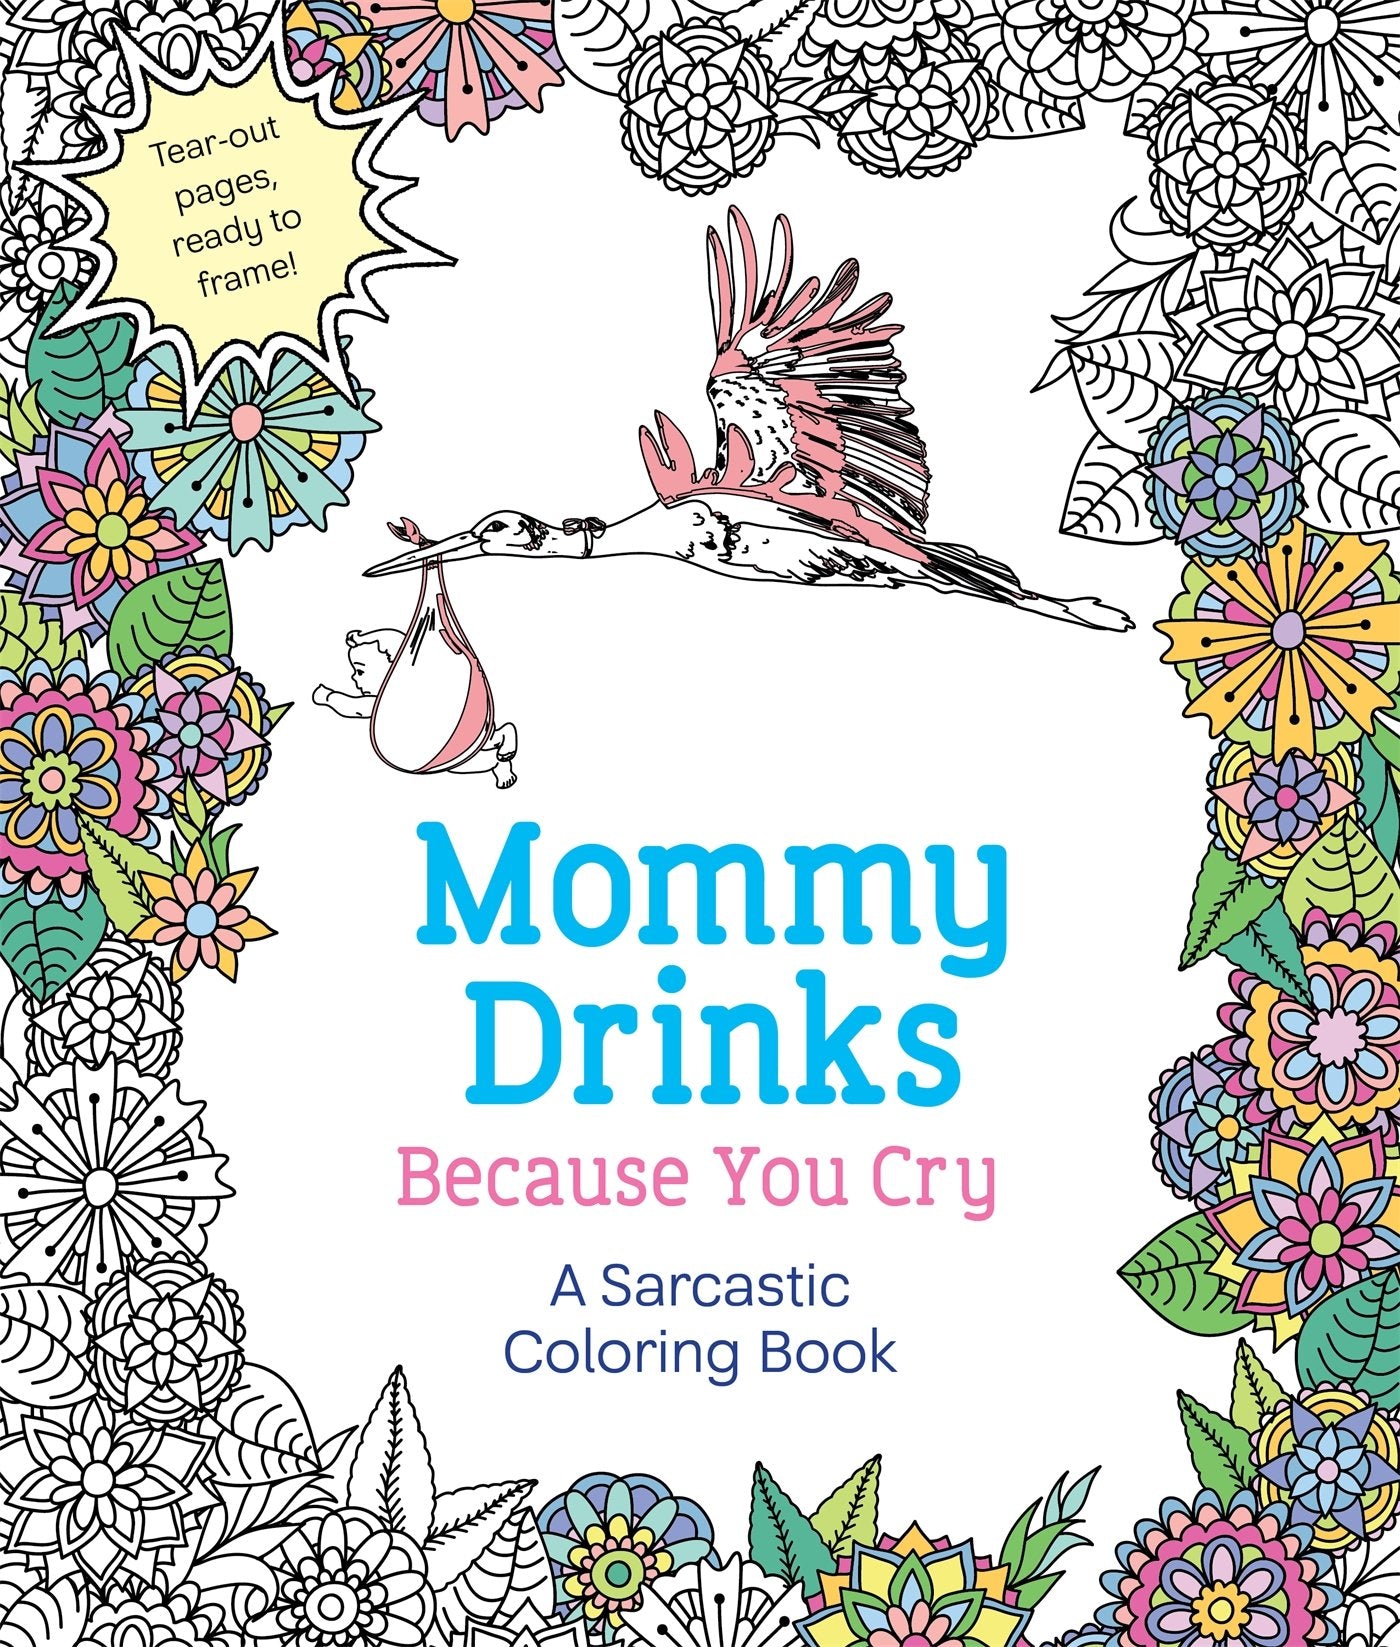 Mommy Drinks Because You Cry: A Sarcastic Coloring Book cover